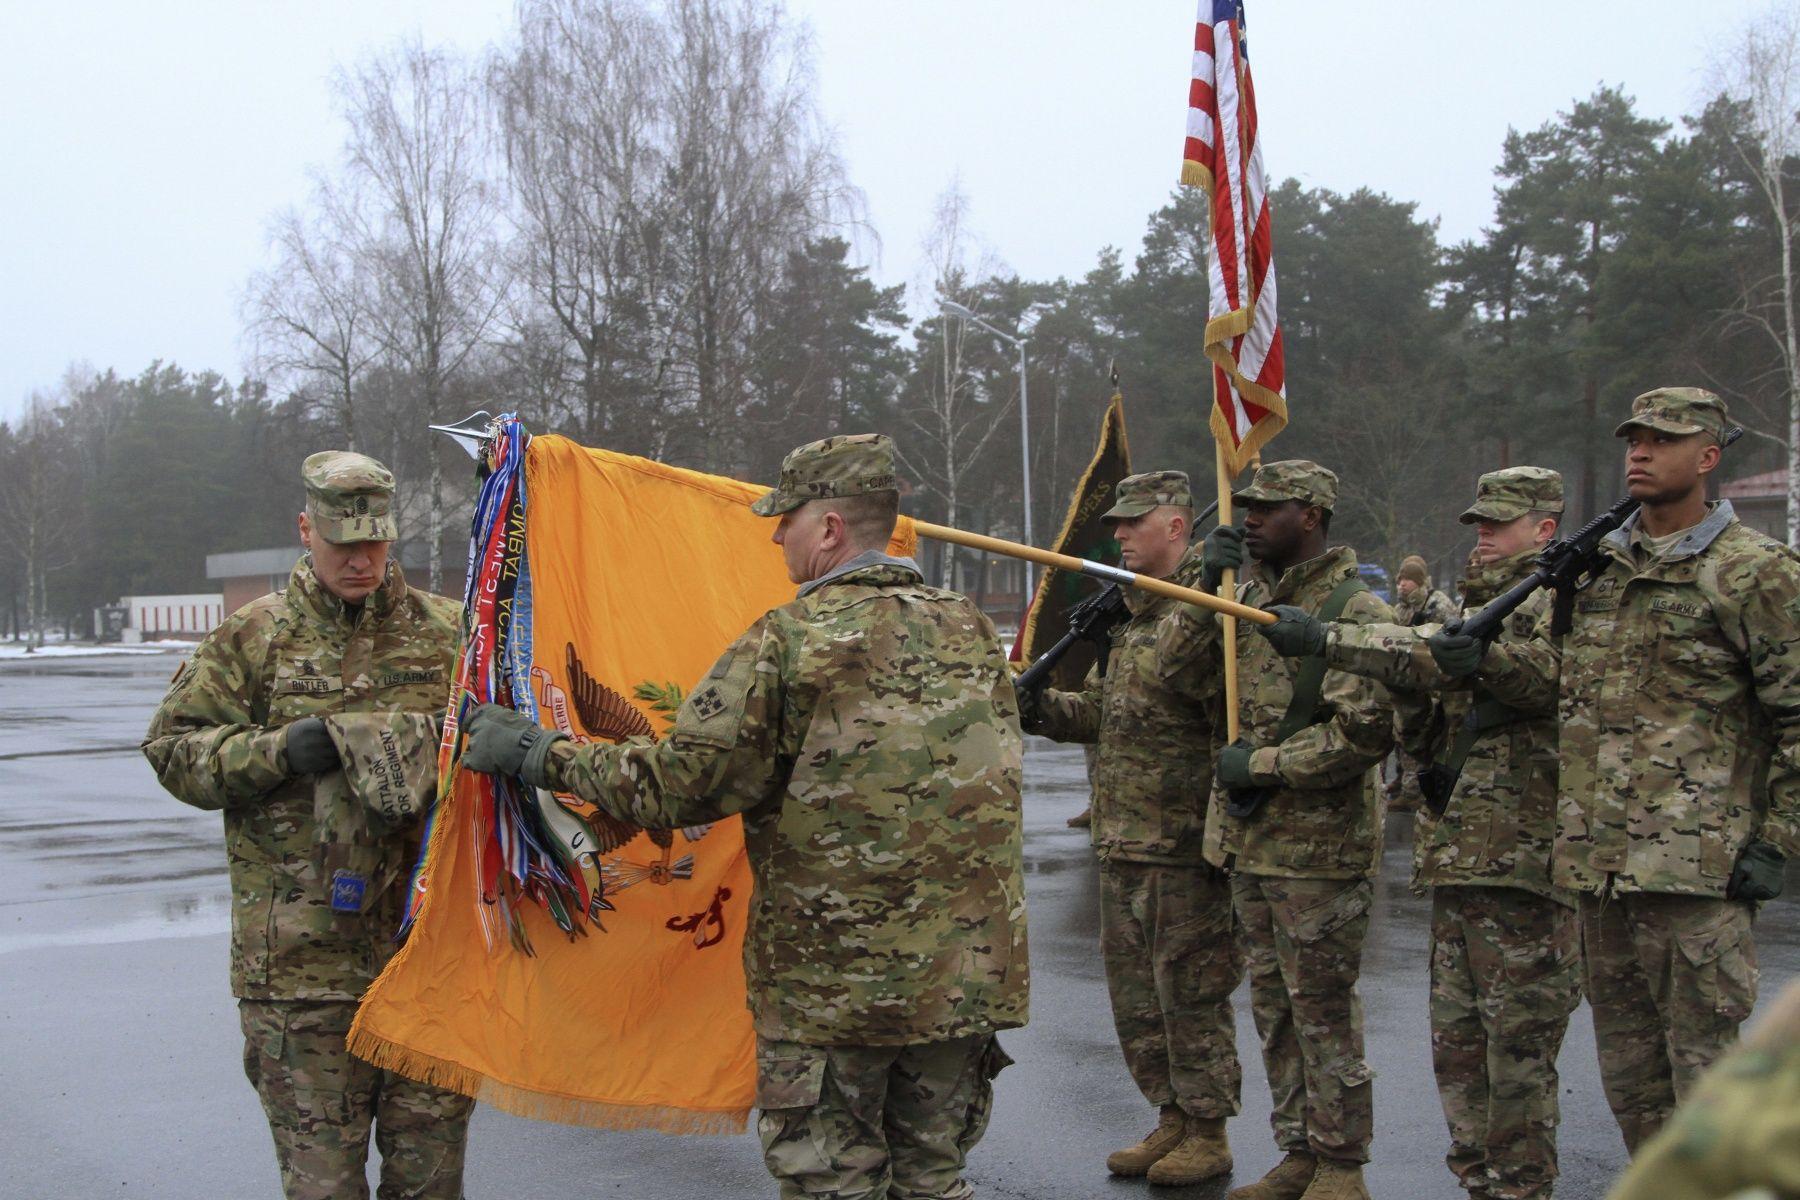 1-68 AR Silver Lion Logo - Latvian Forces Welcome 1 68 AR 'Silver Lions'. Article. The United